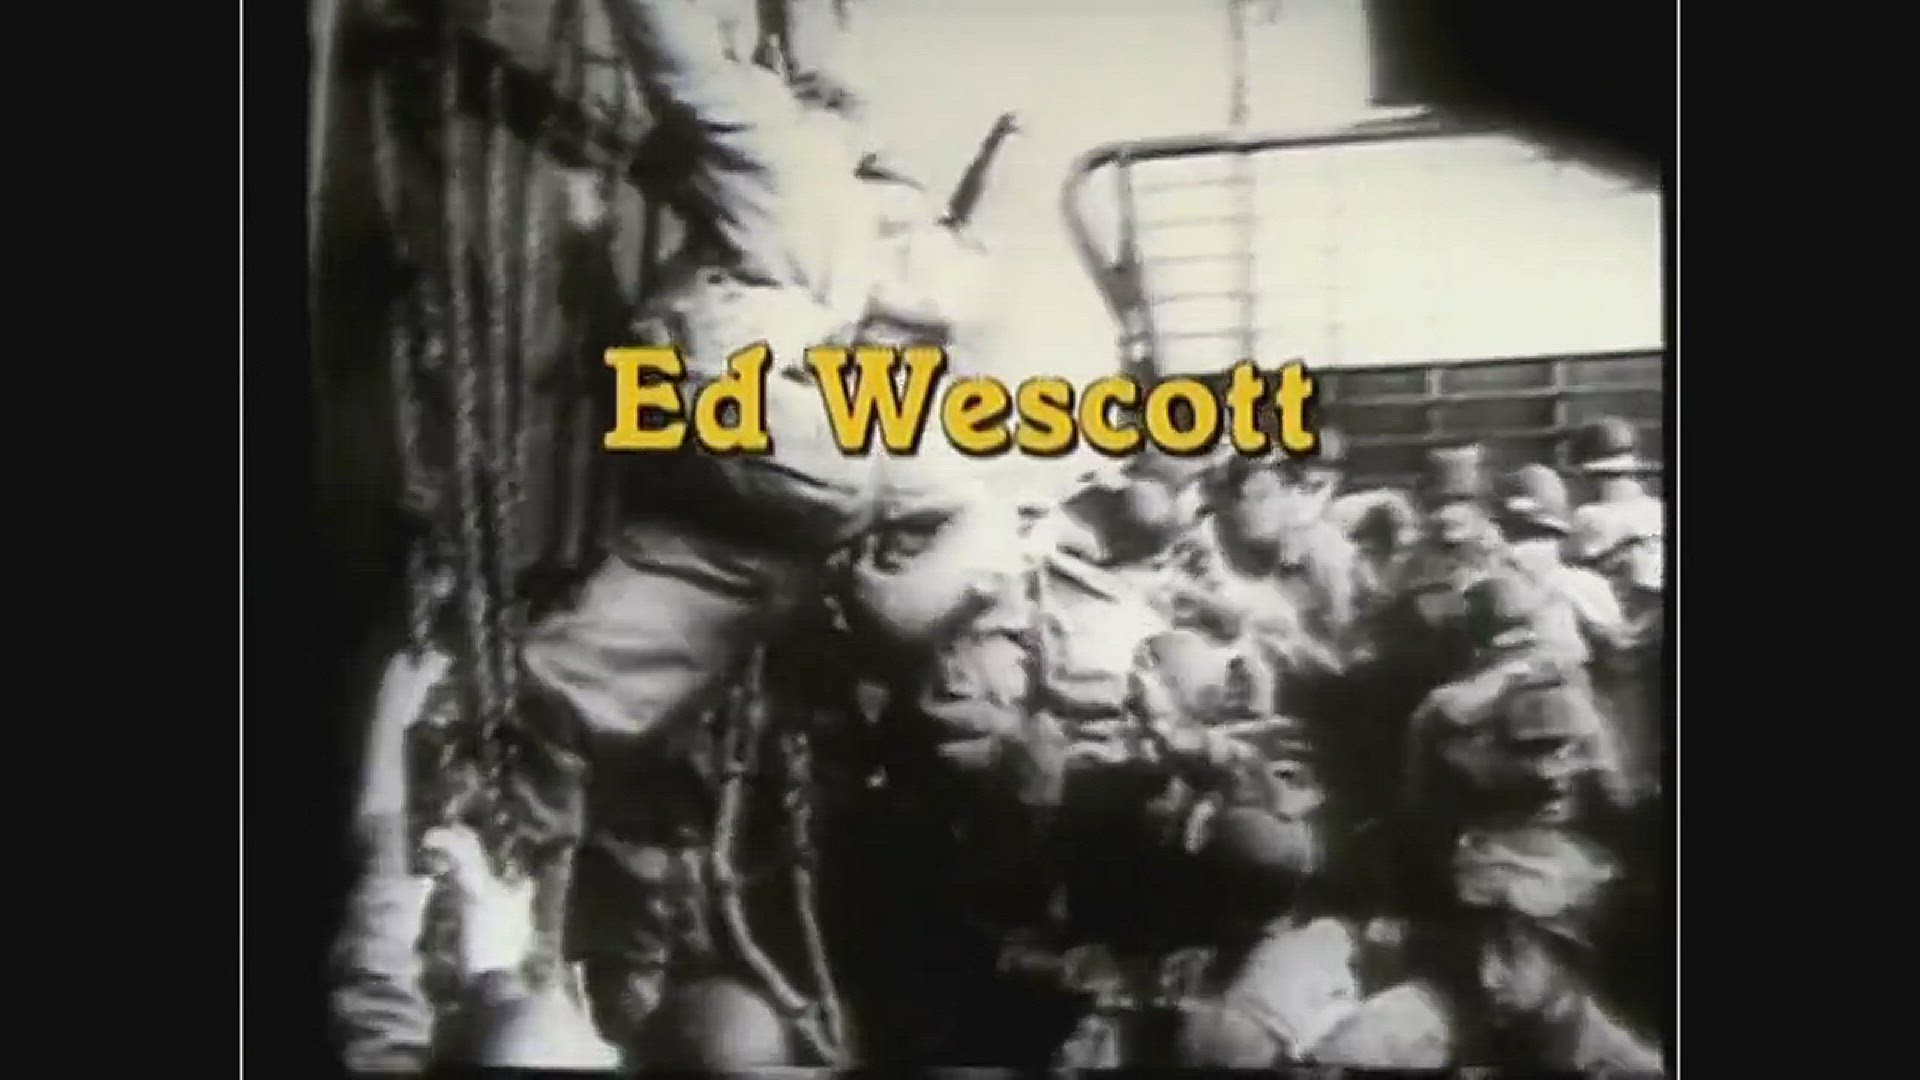 During World War II many U.S. soldiers were over seas fighting. Ed Wescott was also shooting but only with a camera. His mission was to capture the “Secret City” on film.